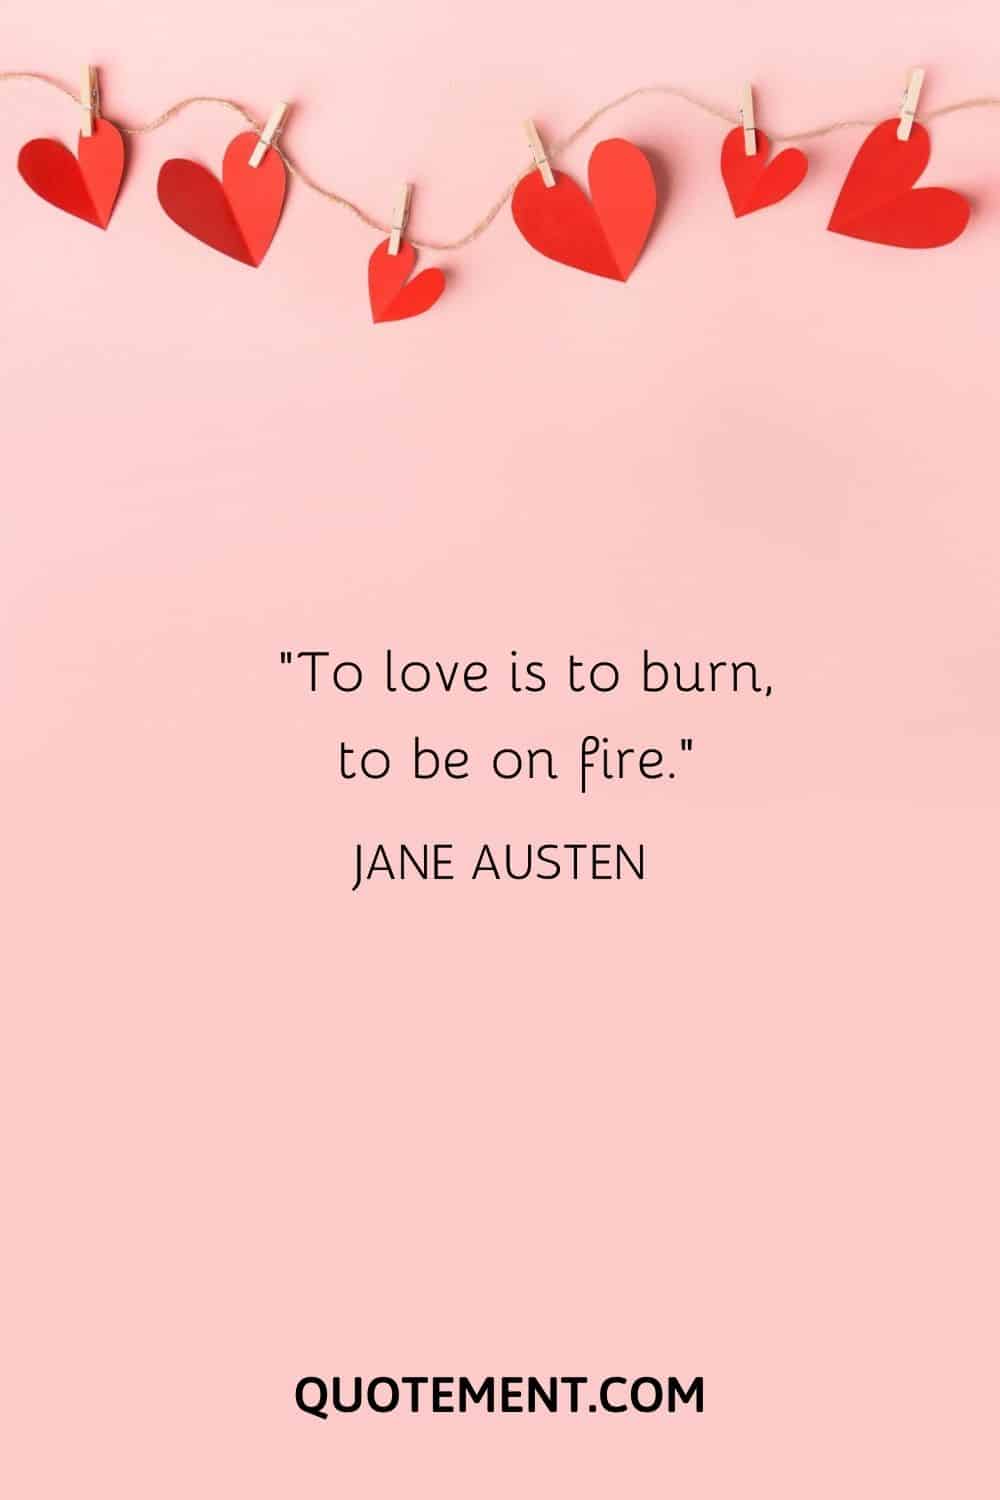 To love is to burn, to be on fire